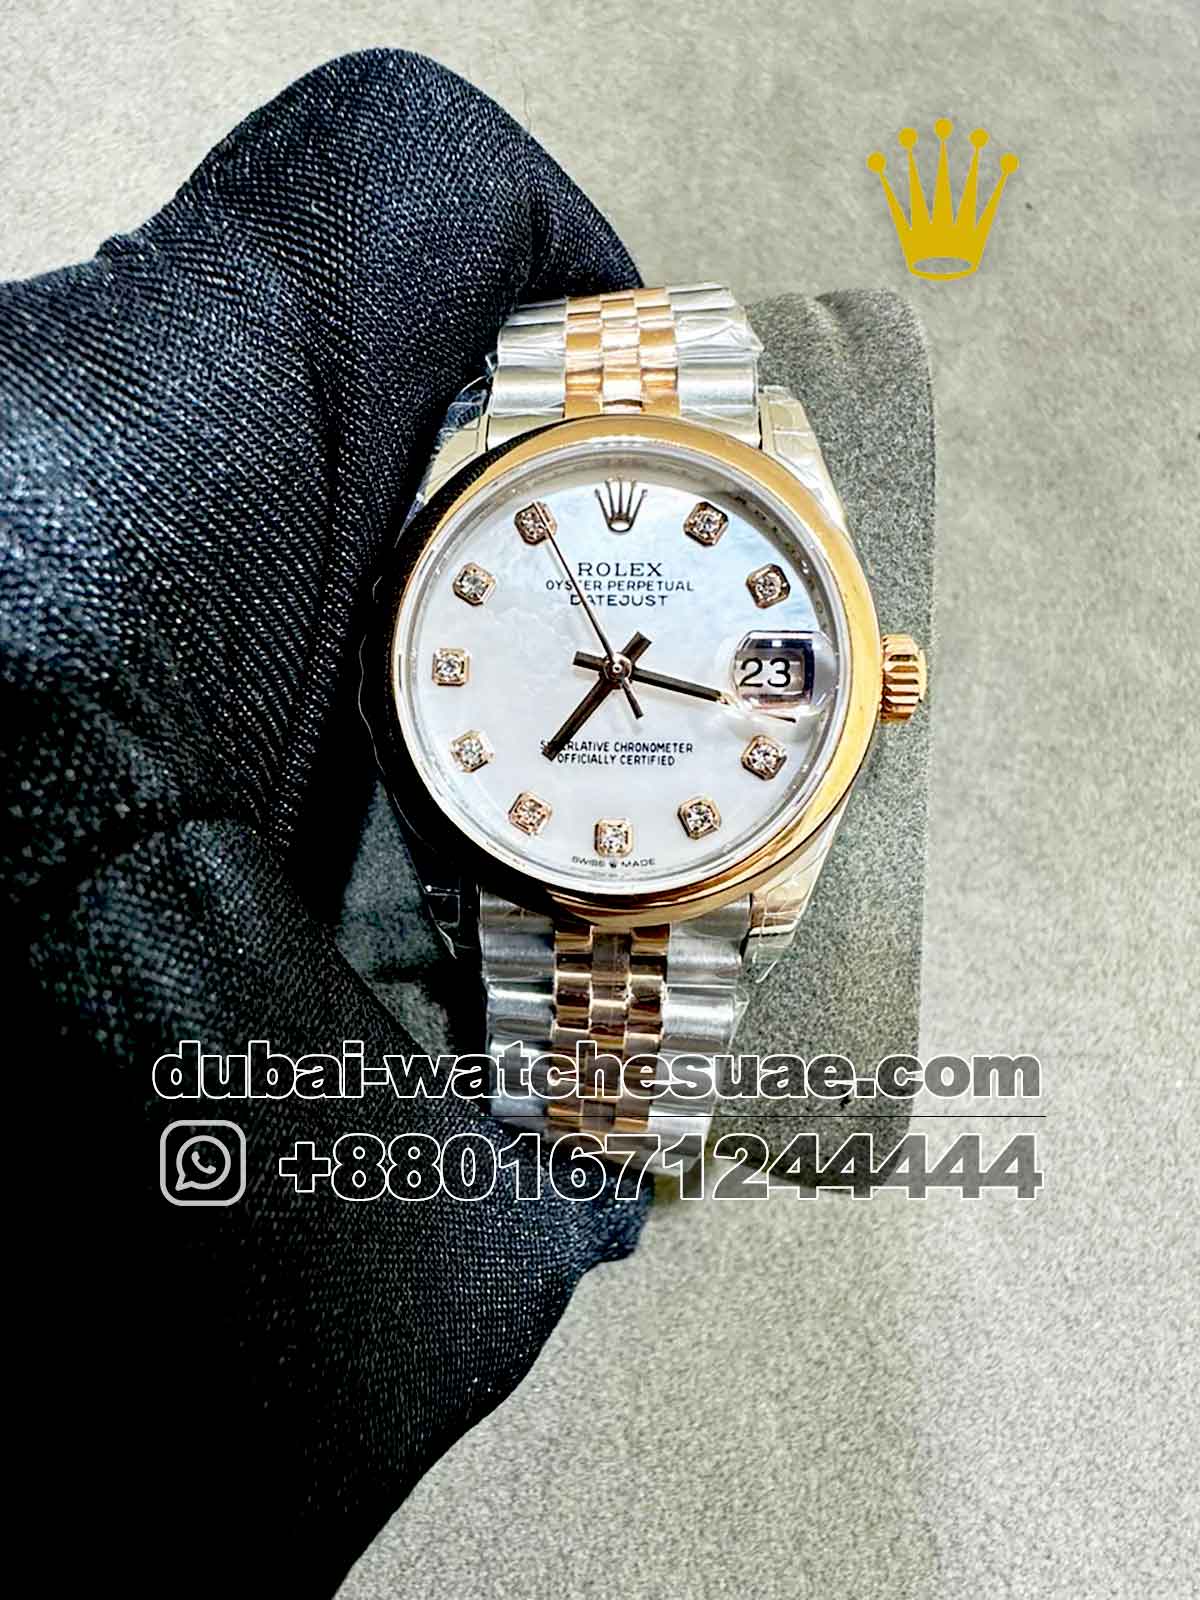 Copy Rolex 31 mm date just White  Dial Stone Numeric ,Plain Rose Gold Bezel with Two Tone Jubilee  Bracelet